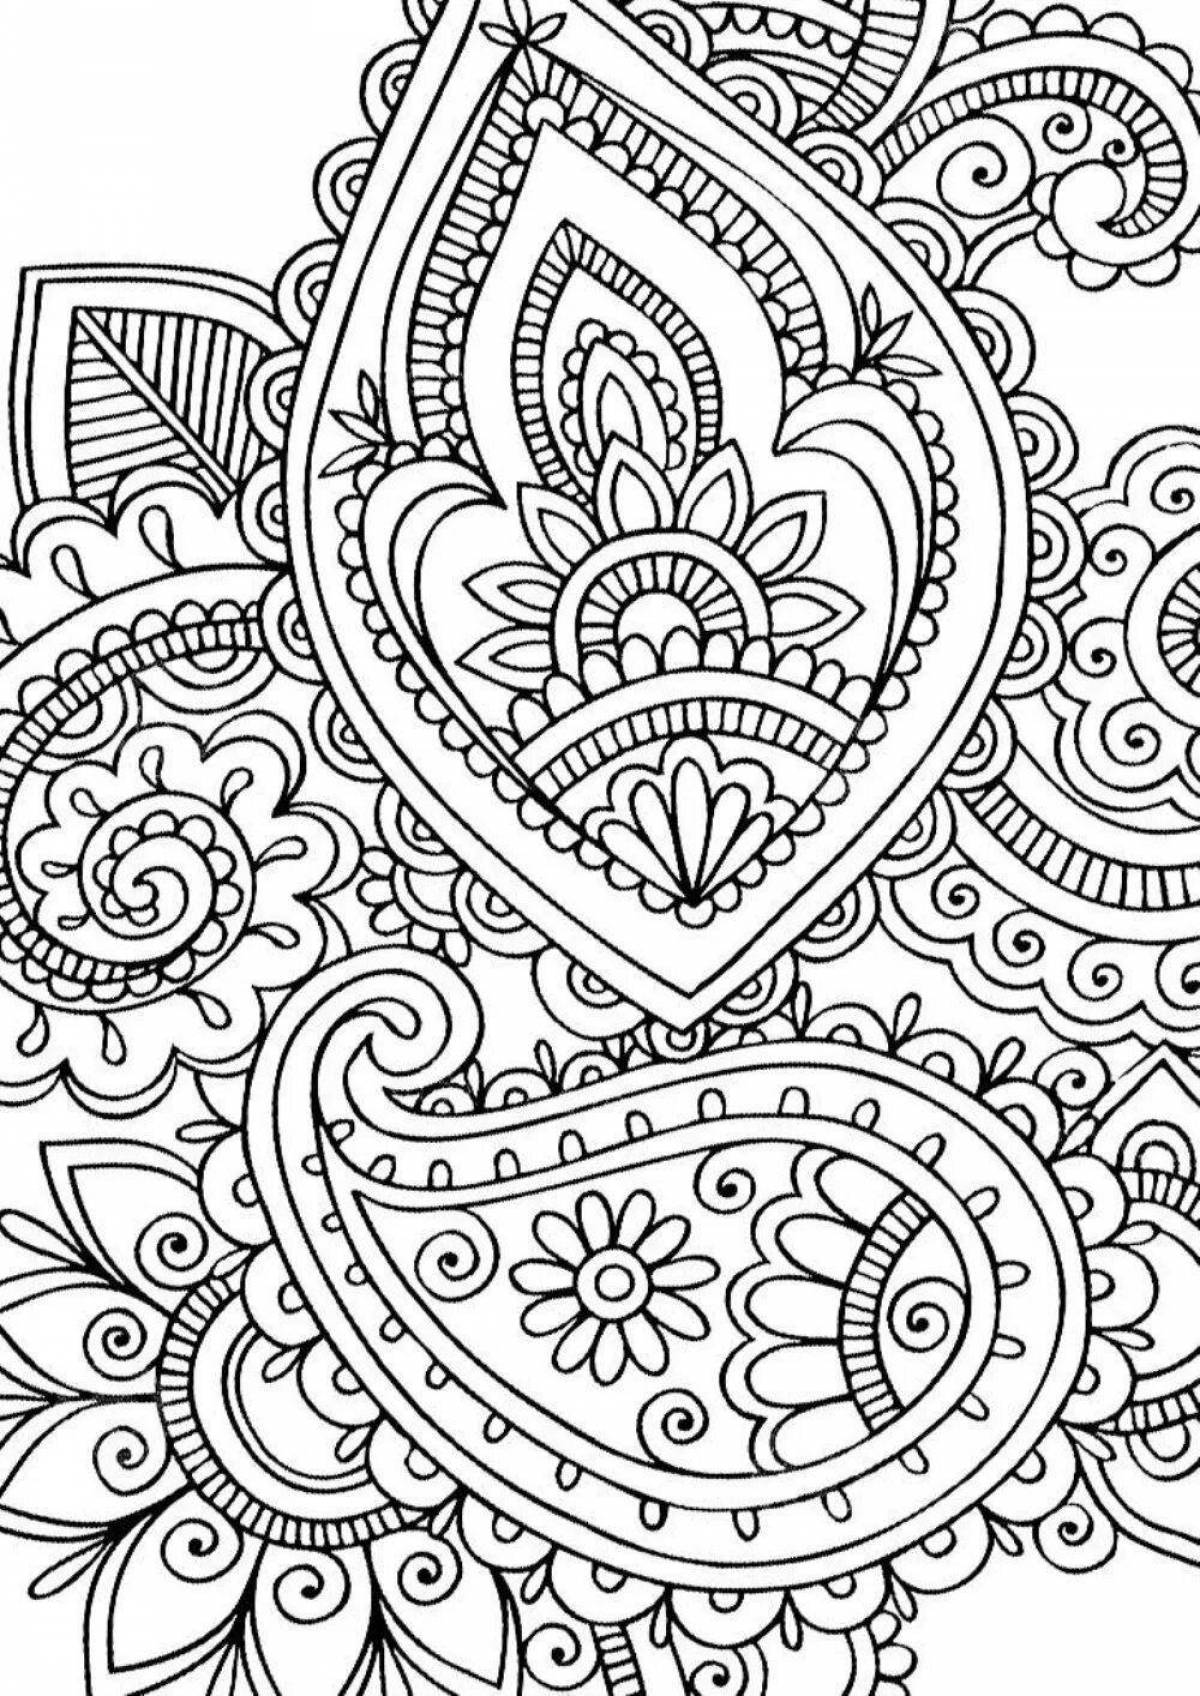 Coloring with ornaments